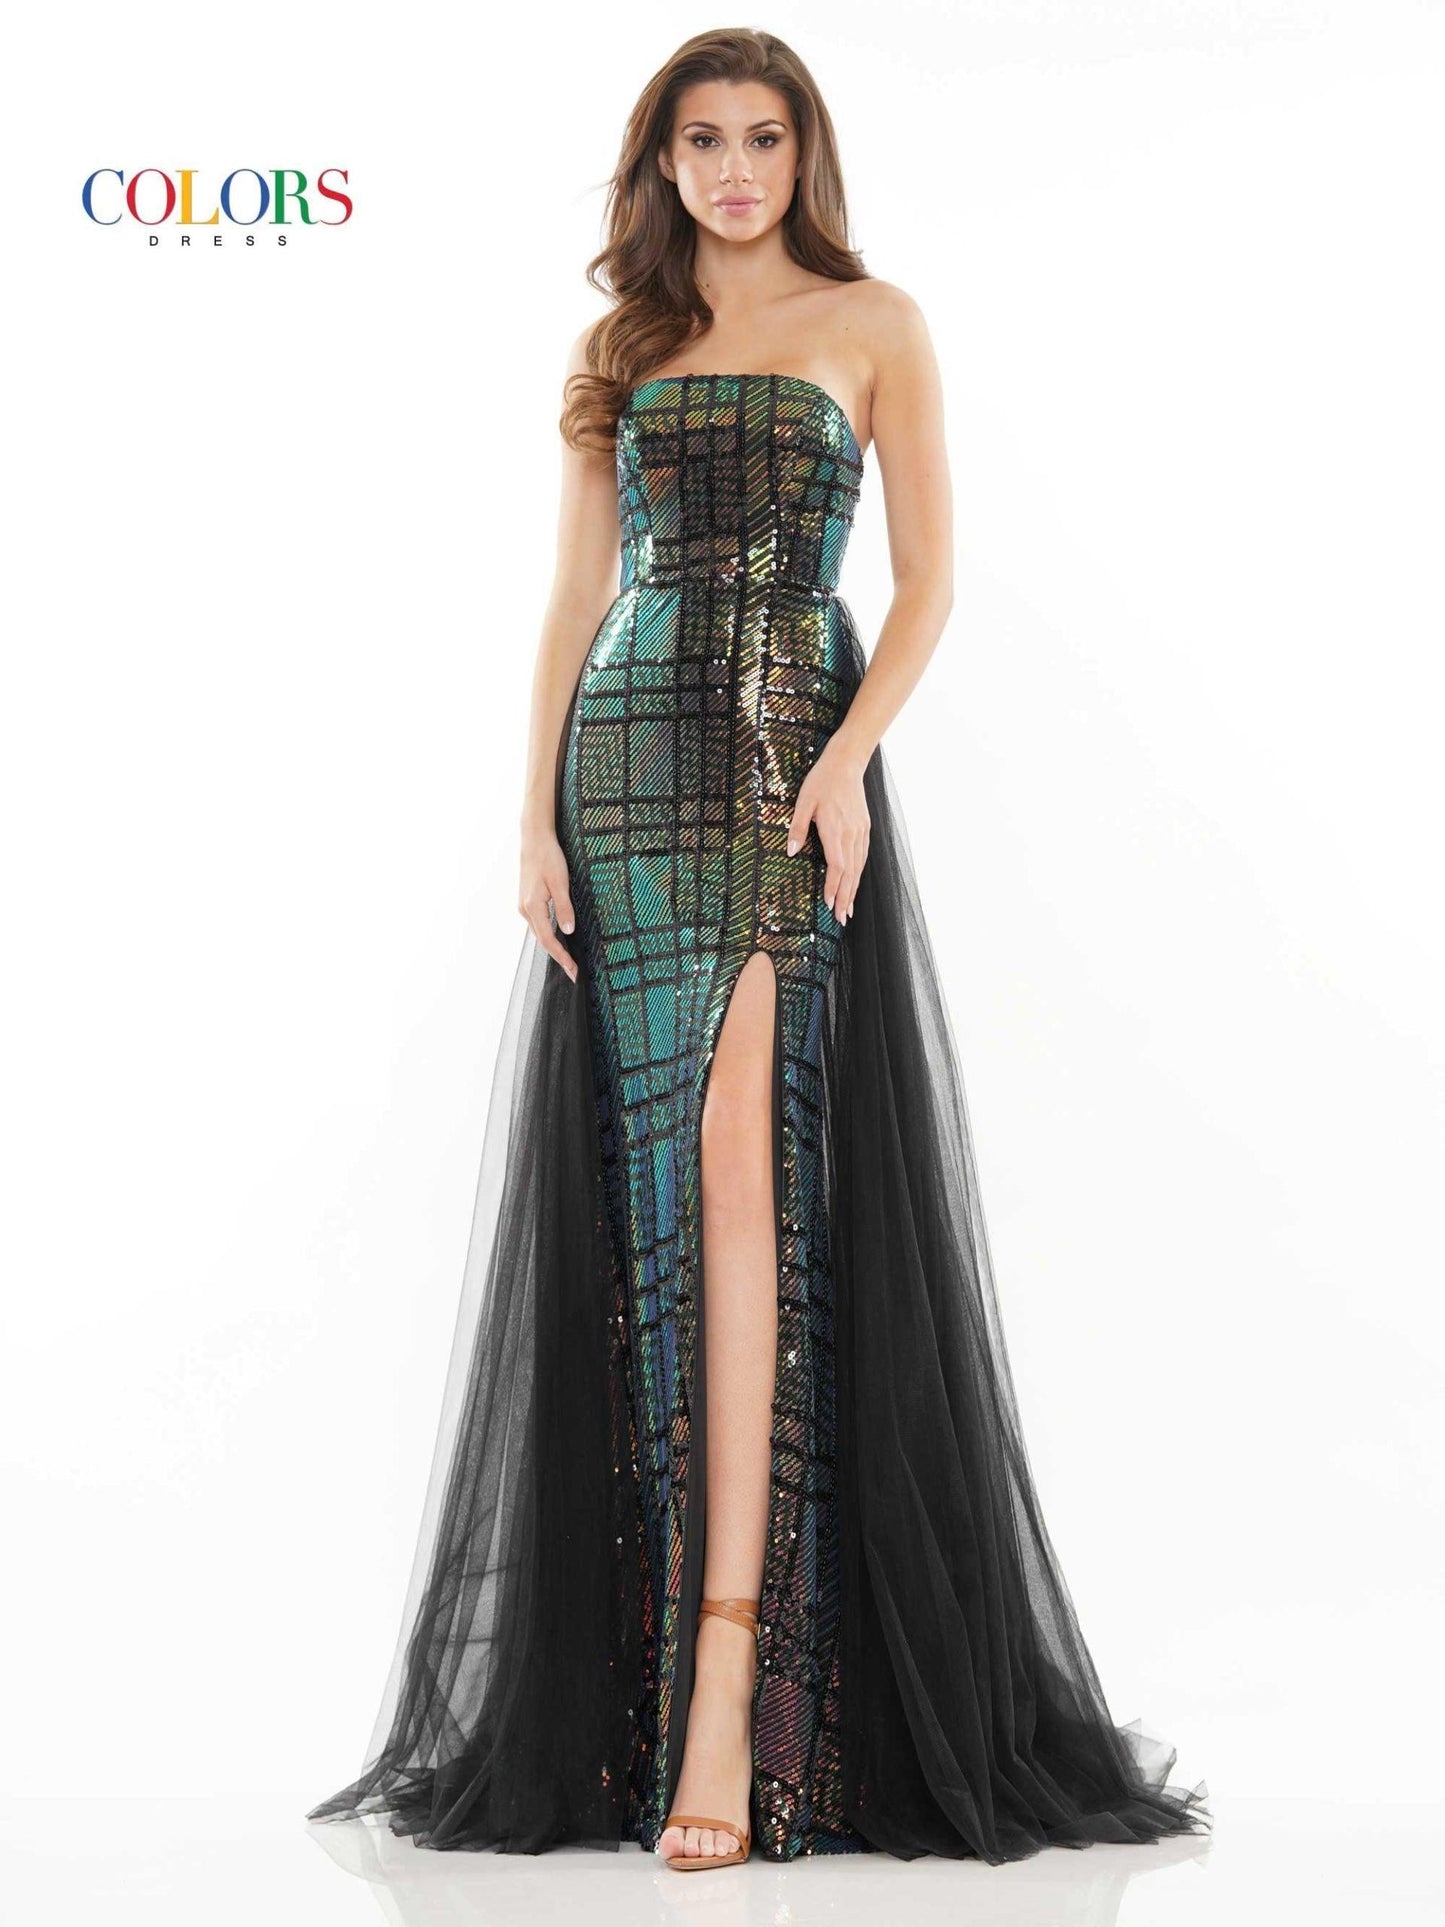 Colors Prom Long Strapless Formal Dress 1077 - The Dress Outlet